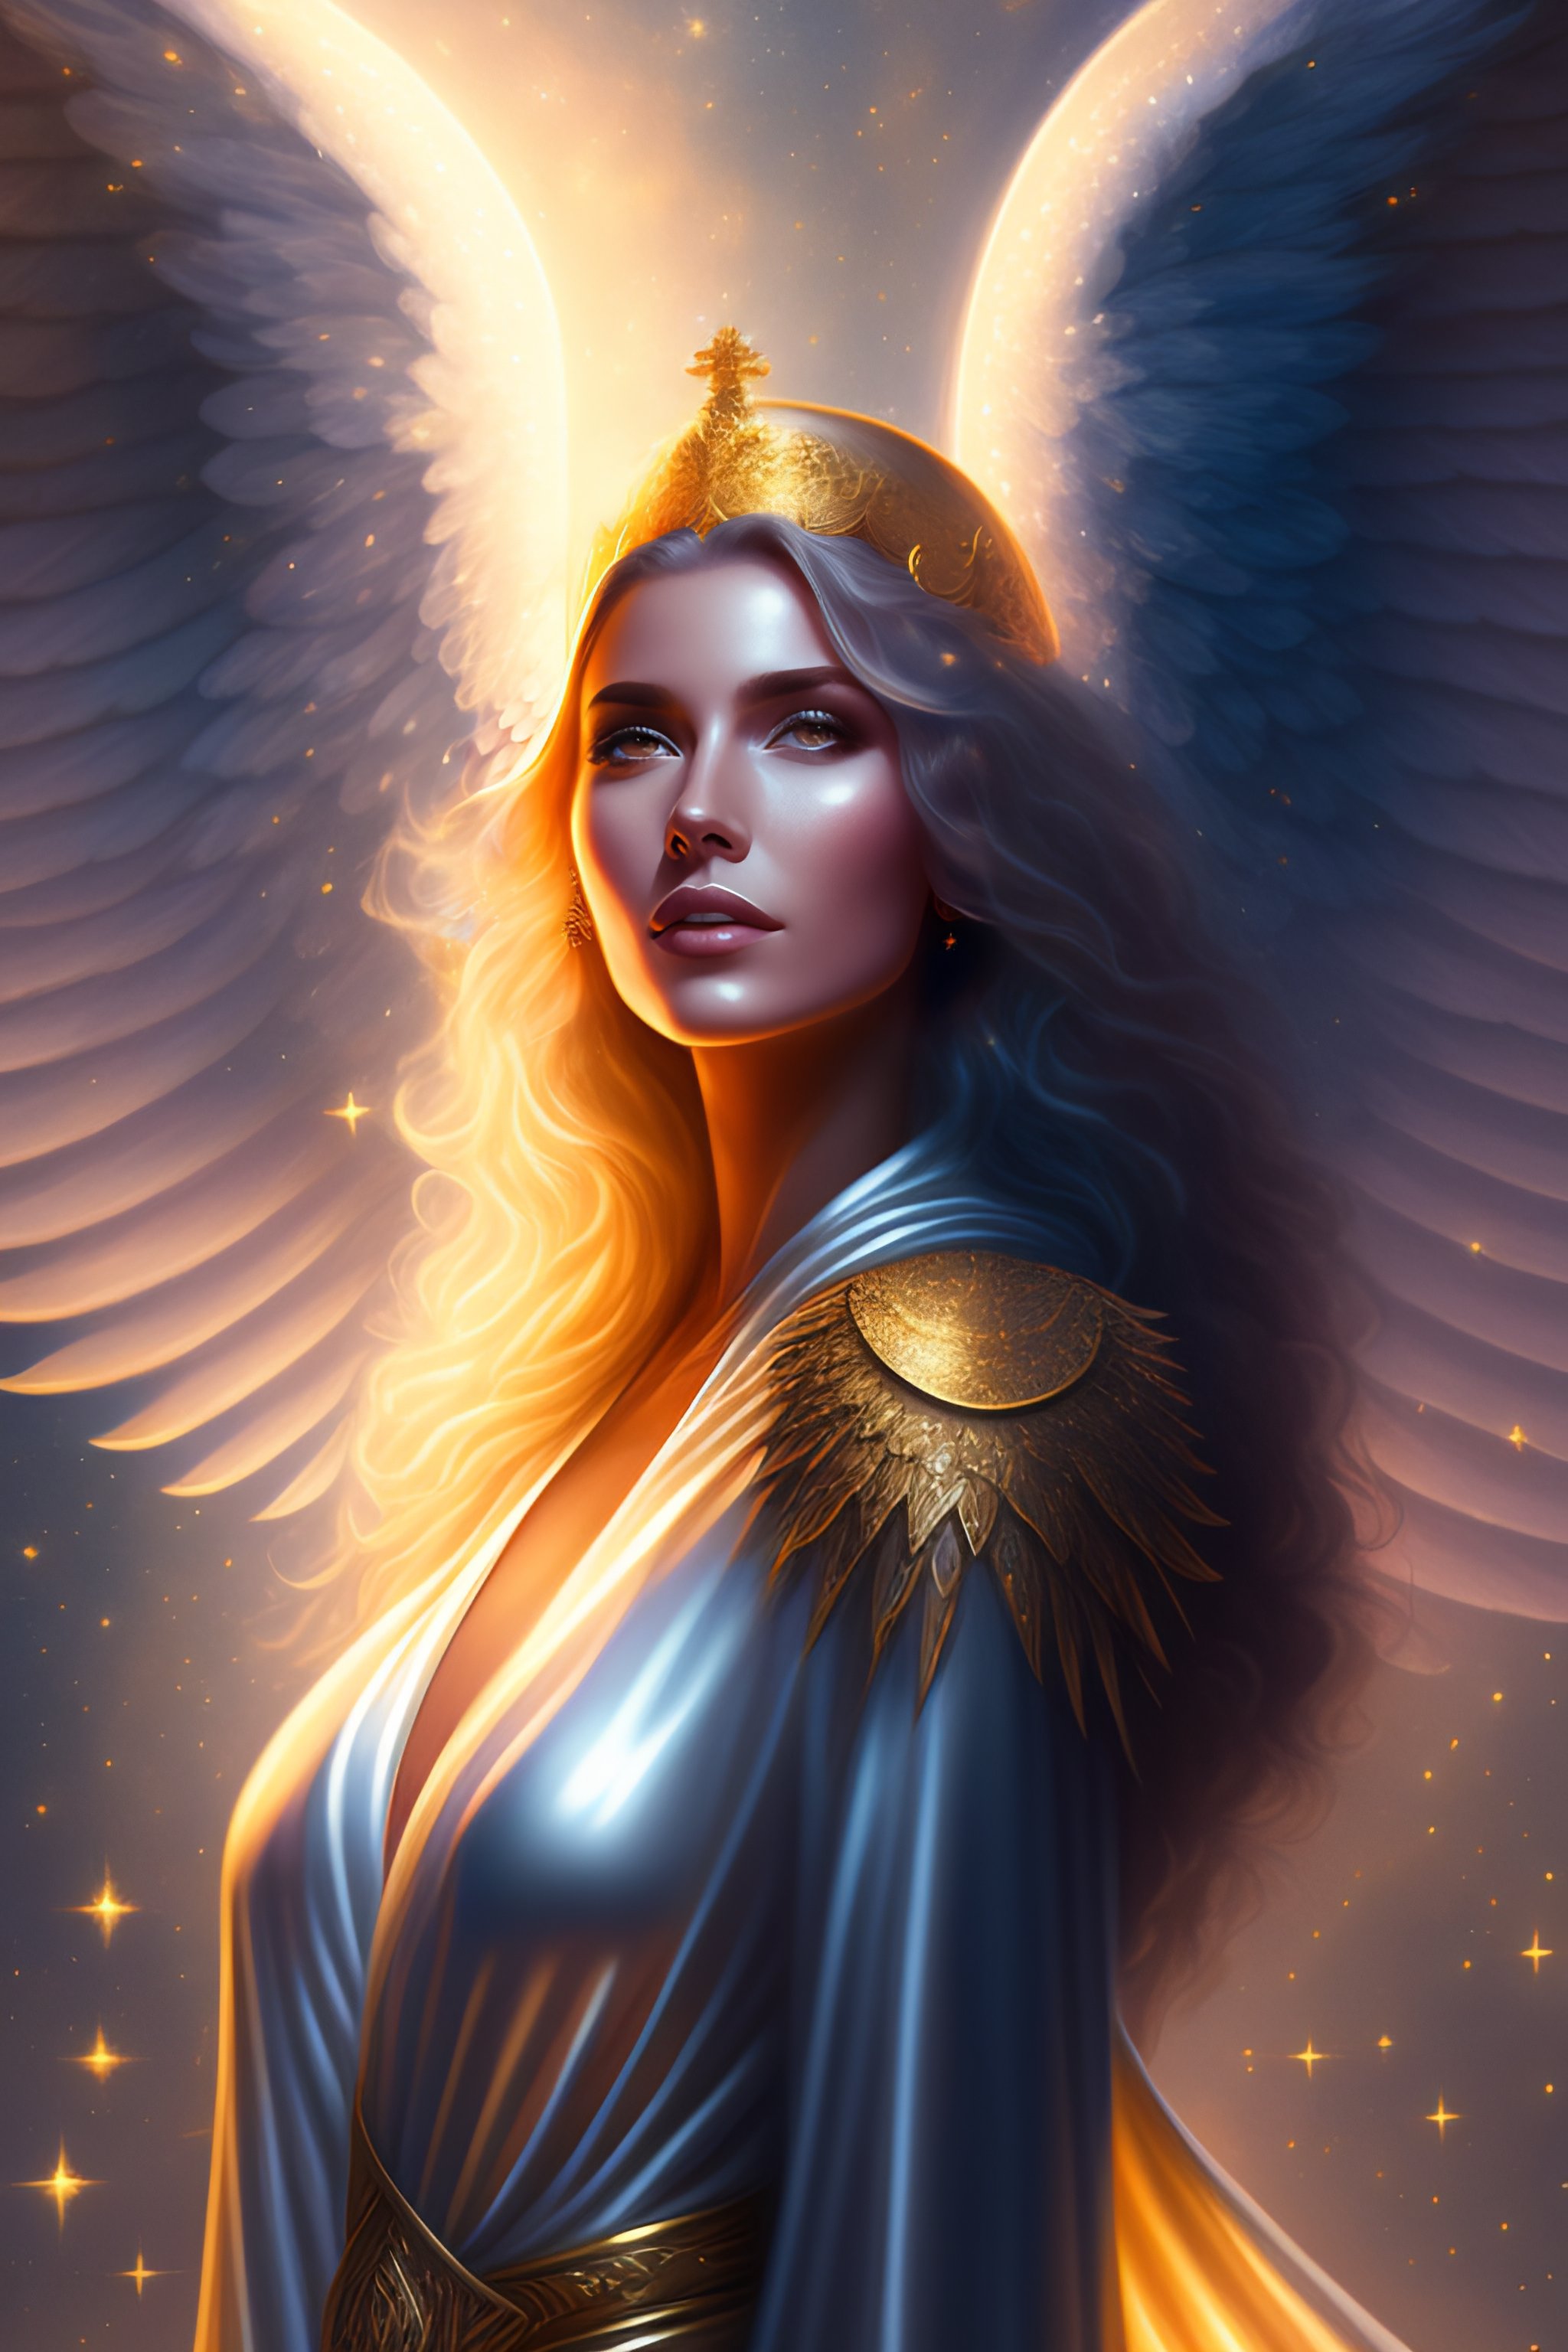 Lexica - A woman with angel wings wearing a silver-white robe meets ...